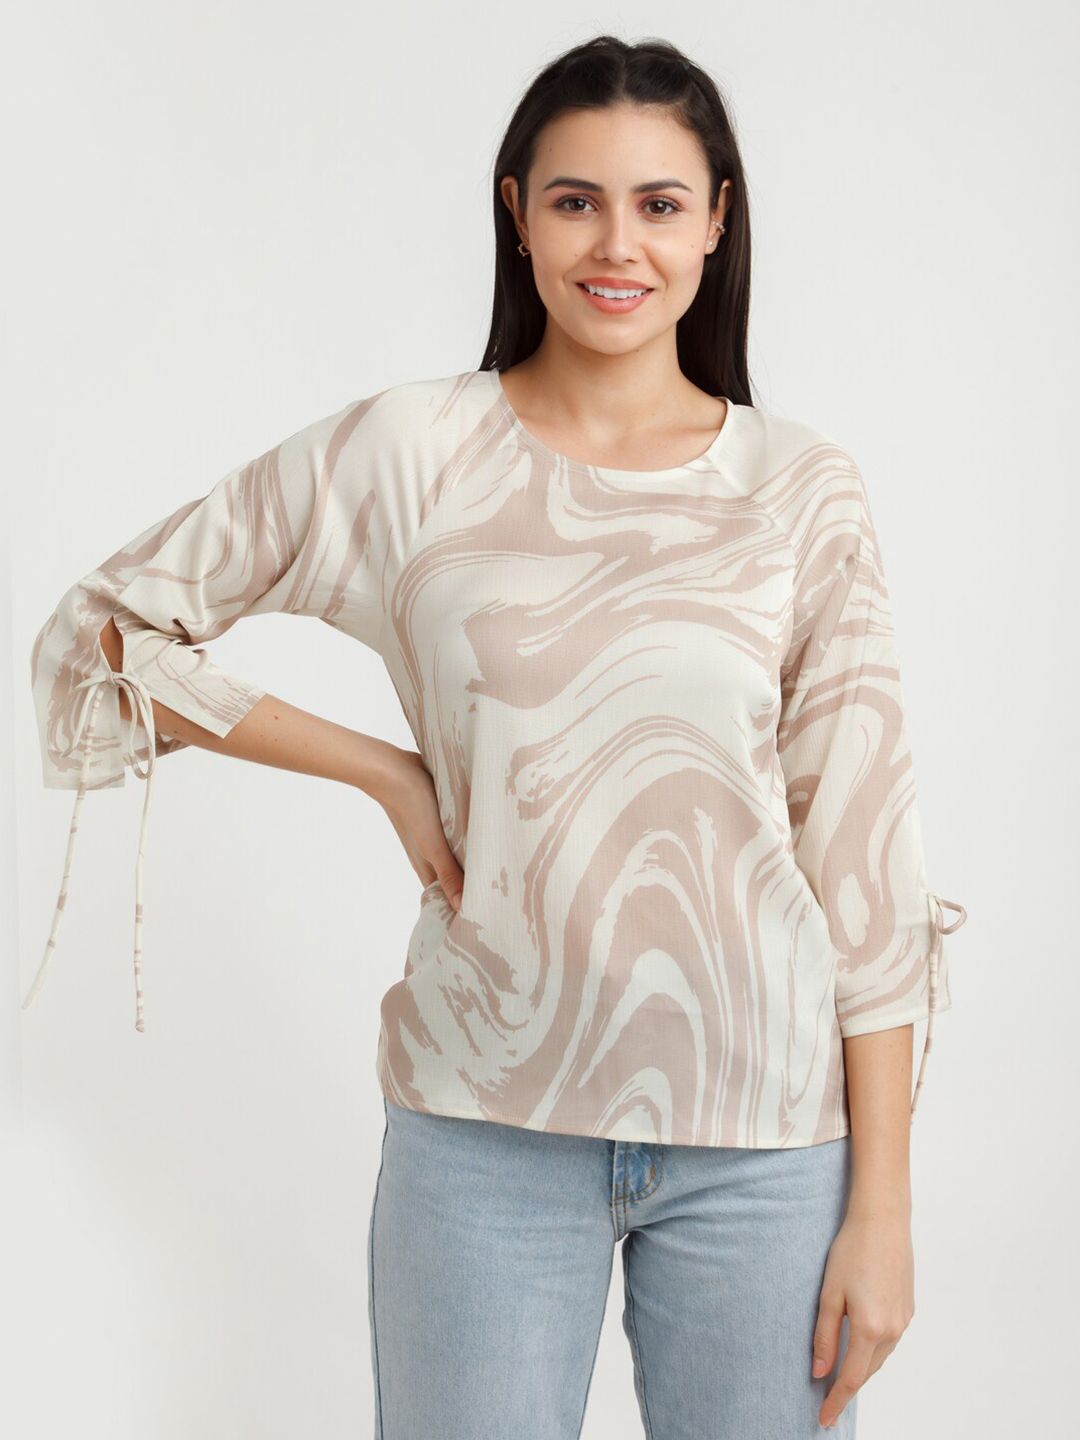 Zink London Beige & Pink Tie and Dye Top Price in India